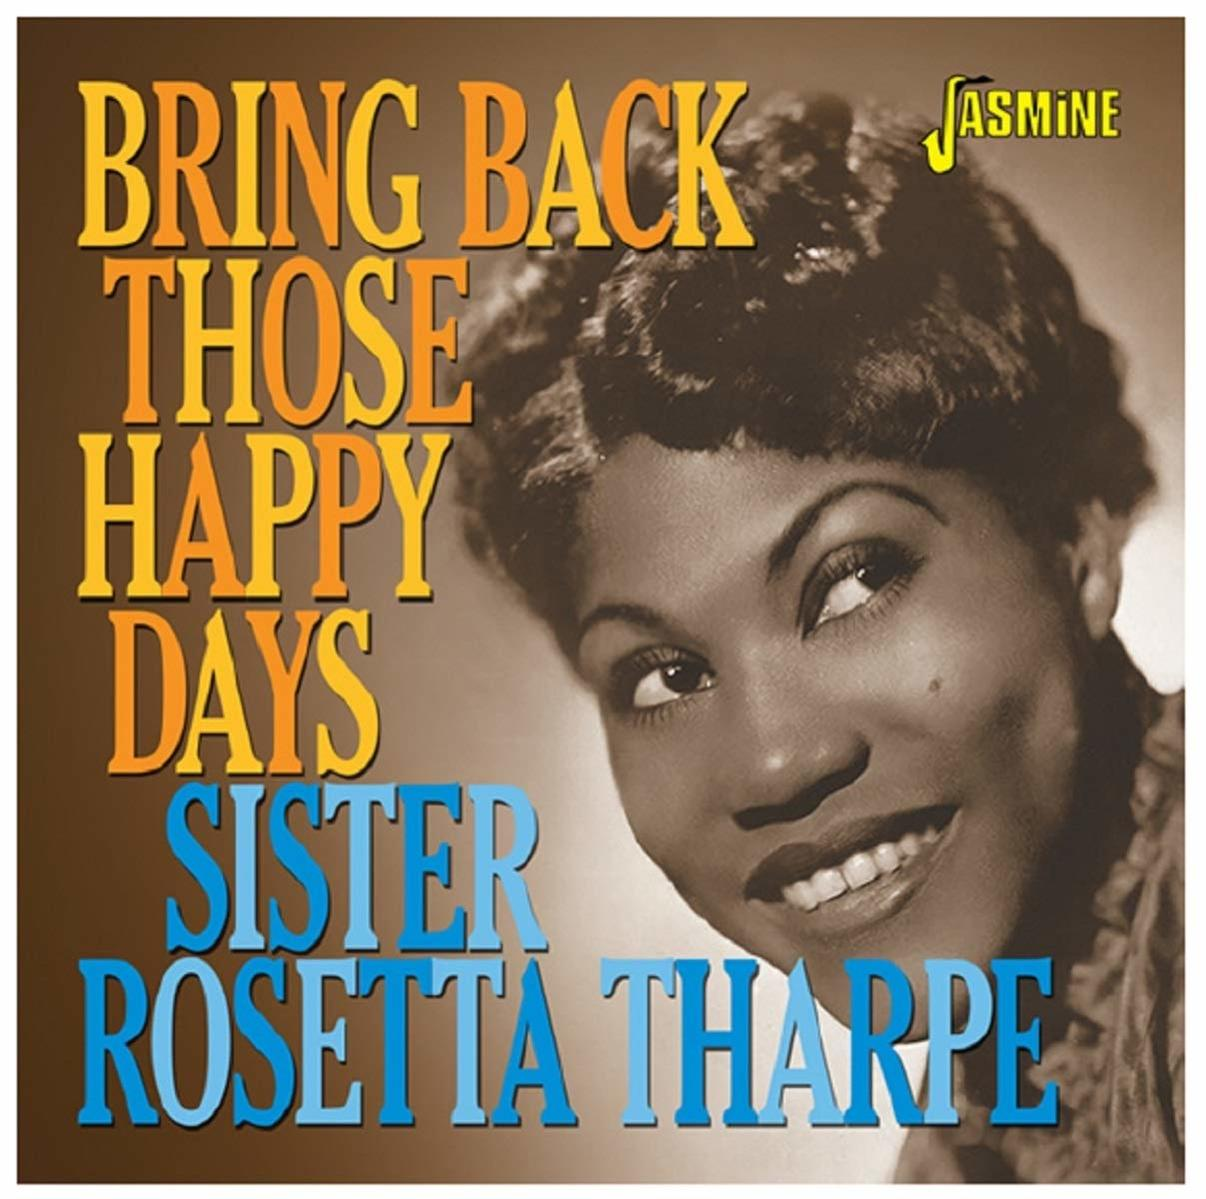 - Tharpe DAYS. BACK AND HITS (CD) - BRING THOSE Sister Rosetta GREATEST HAPPY SEL